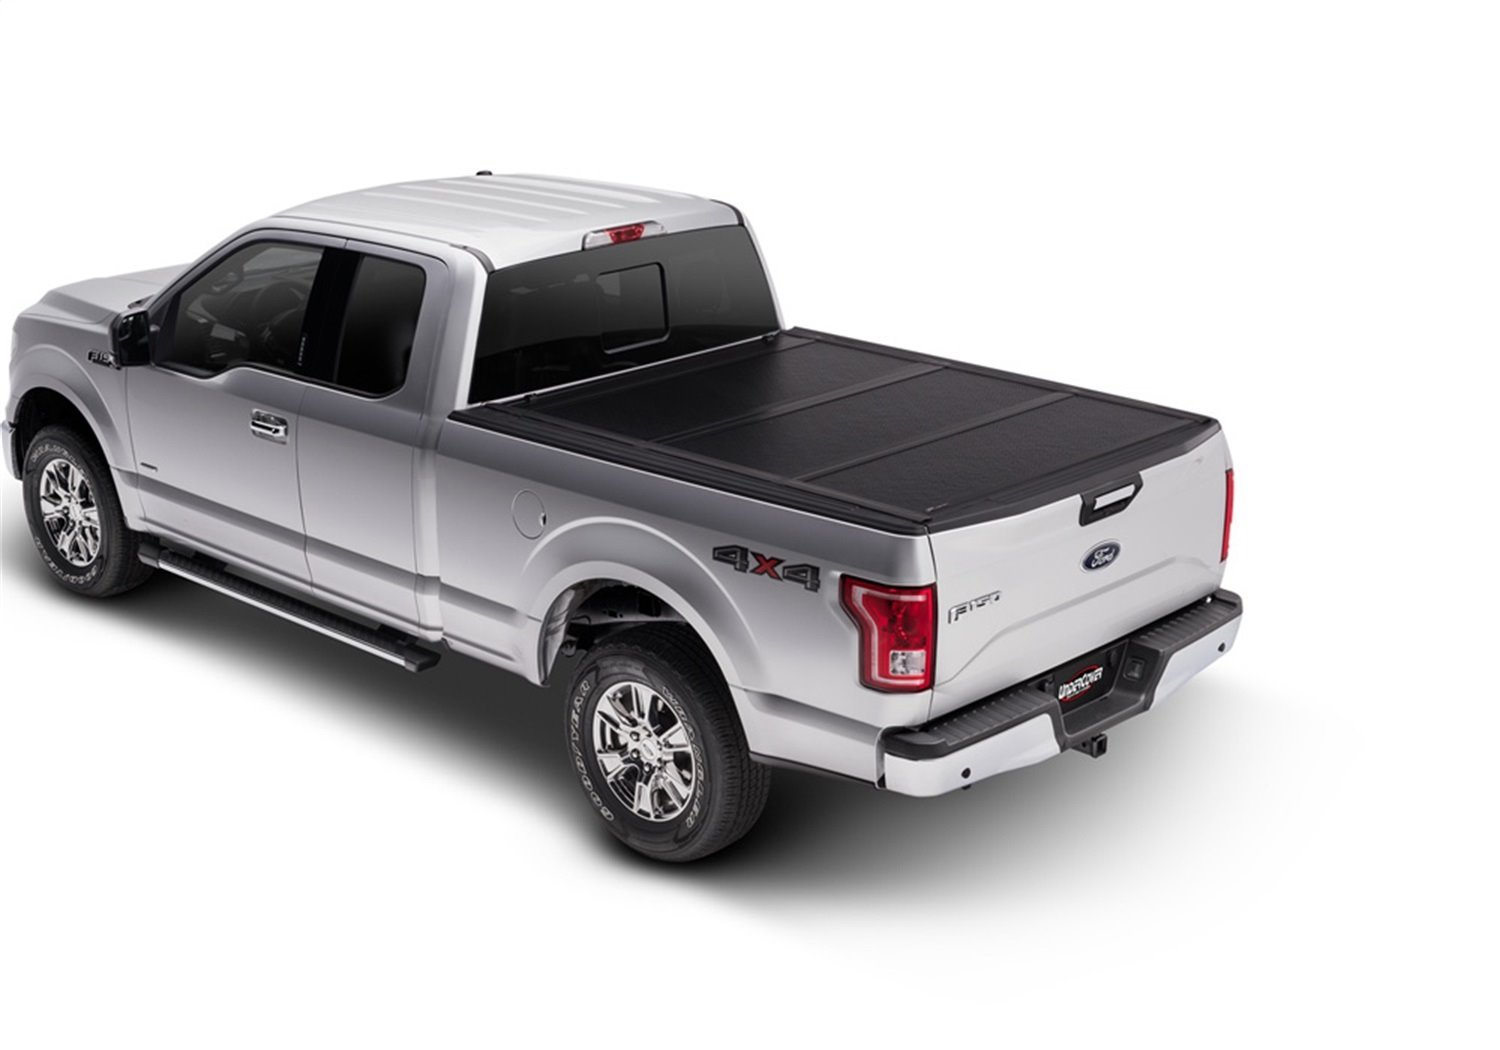 FX21000 Flex Hard Folding Cover, 1997-2003 (2004 Heritage) Ford F-150 6'6" Bed STD/EXT Cab, Black Textured